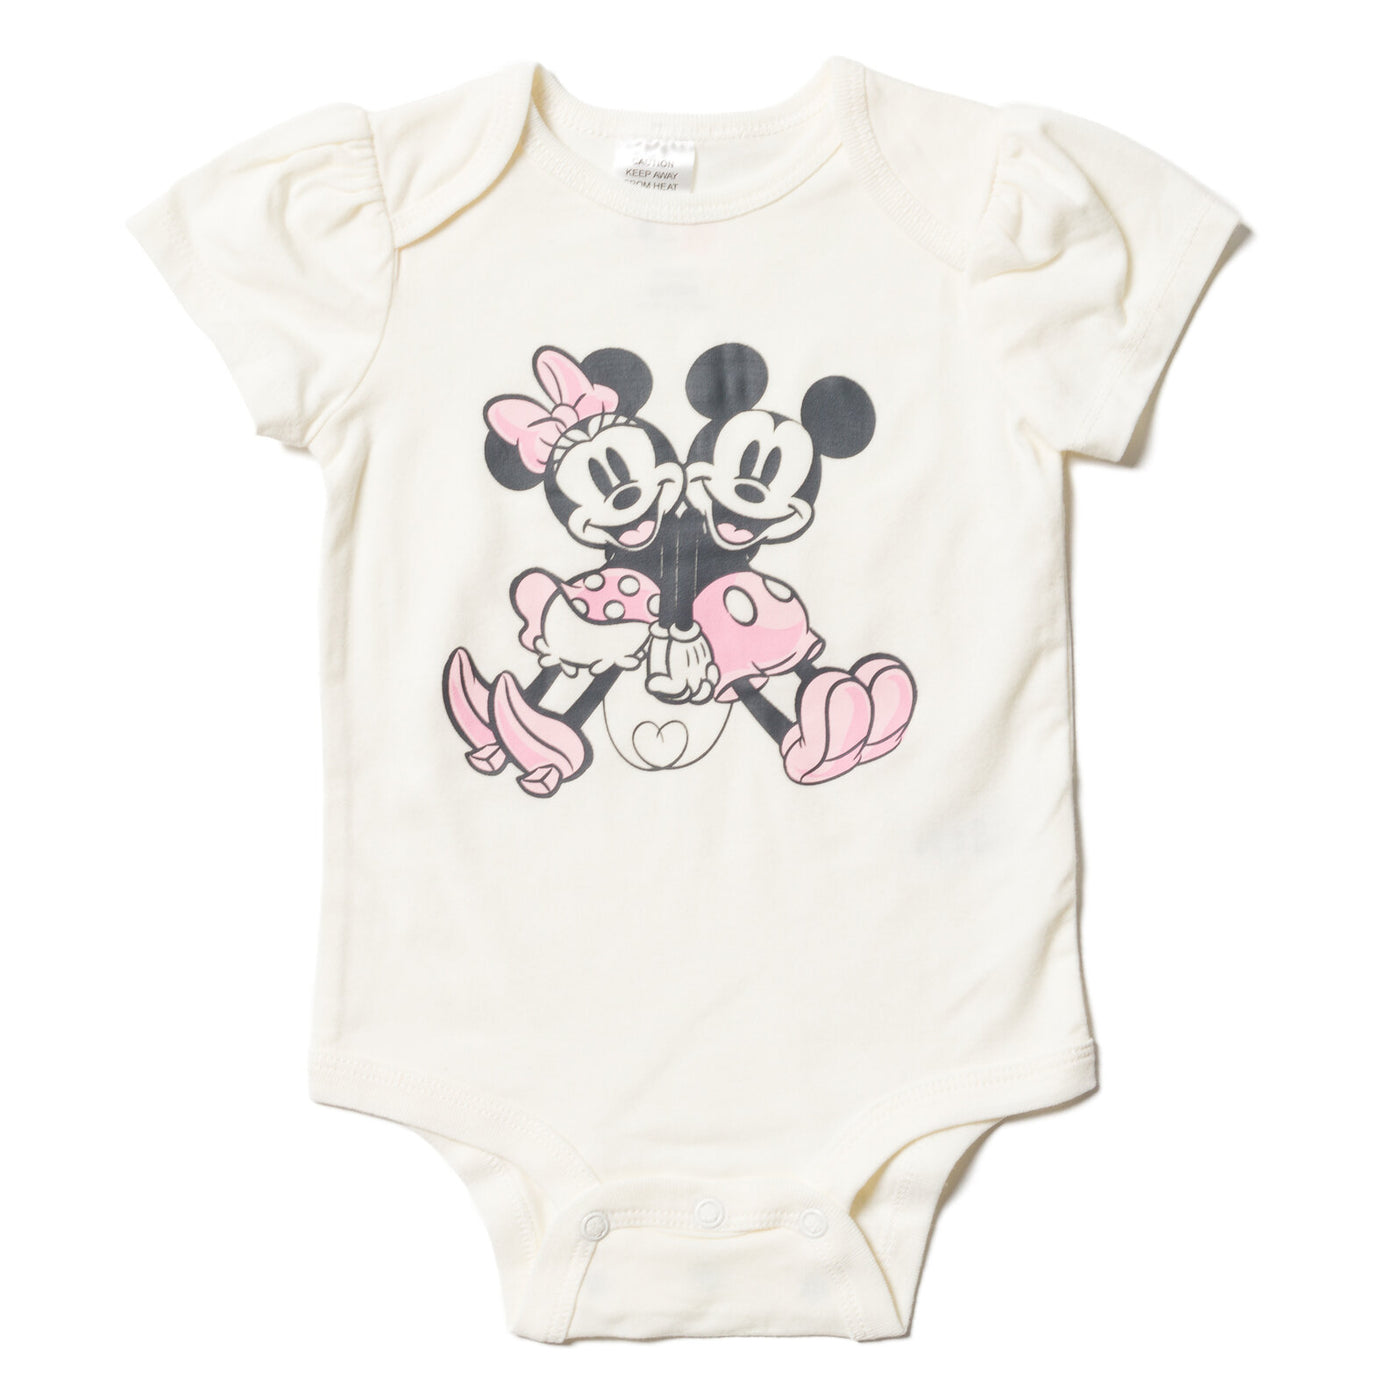 Minnie Mouse Mickey Cuddly Short Sleeve Bodysuits & Pants